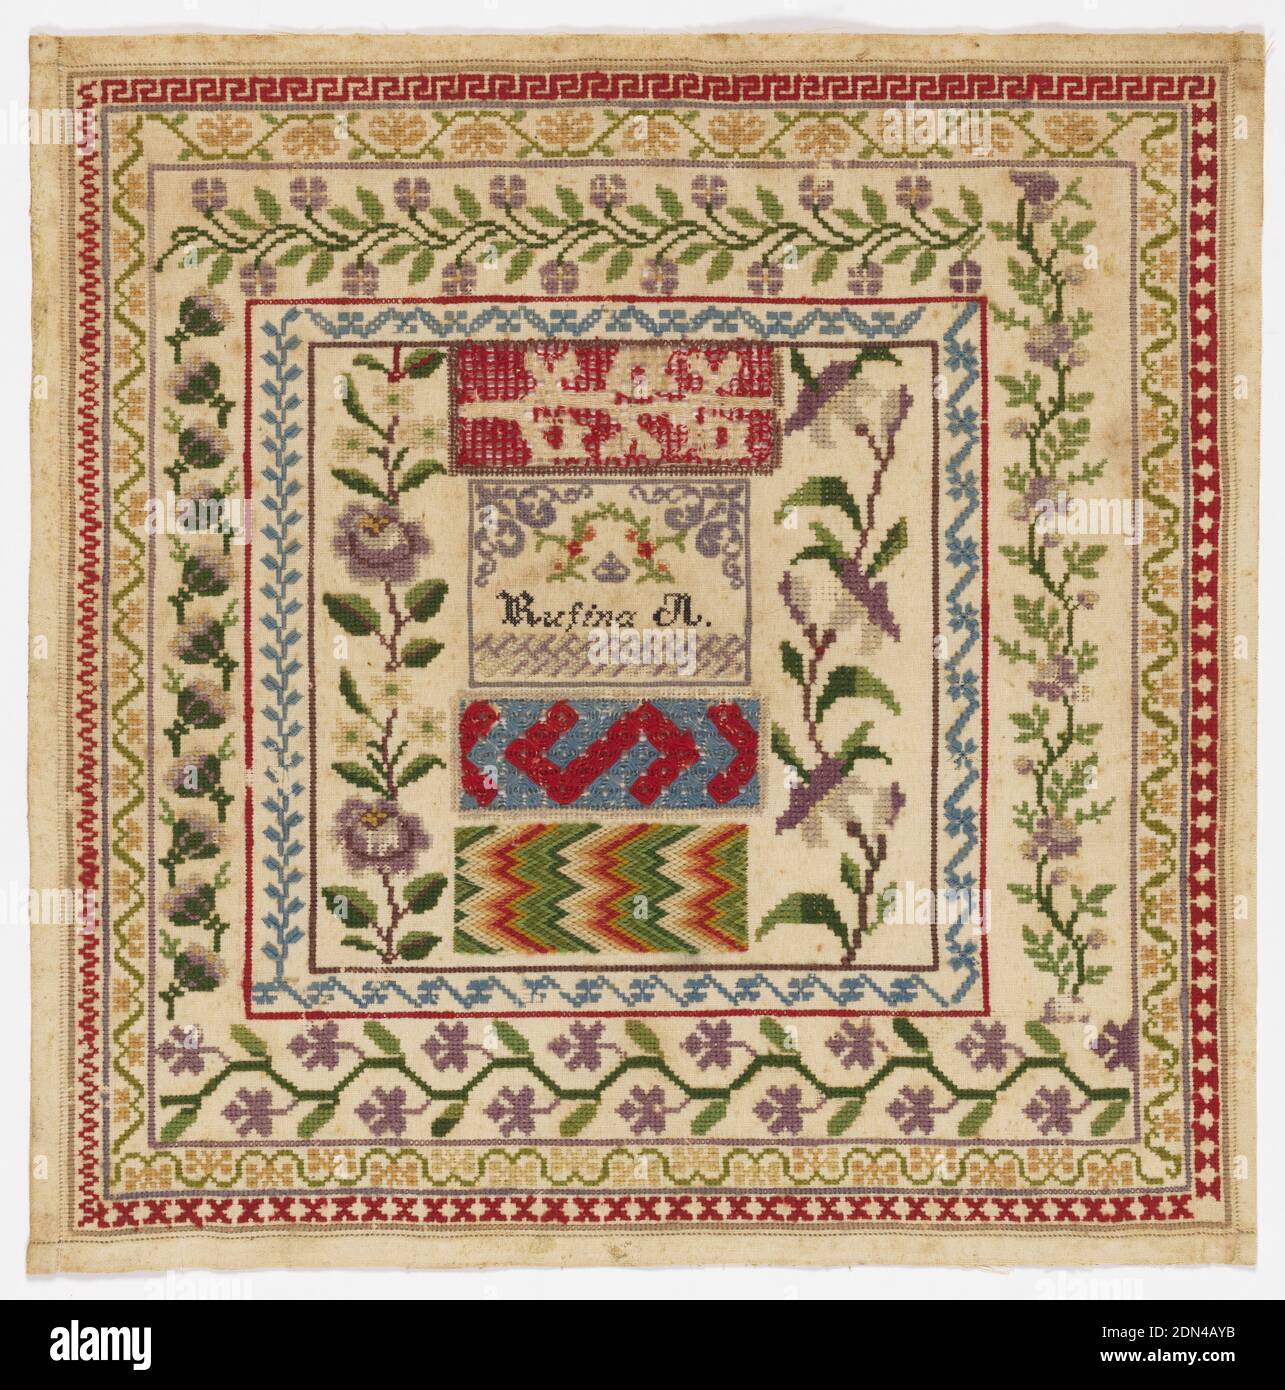 Sampler, Medium: wool embroidery on cotton foundation Technique:  embroidered in cross and counted satin stitches with open work on plain  weave foundation, Worked in brightly colored wools in blue, green, yellow,  orange,